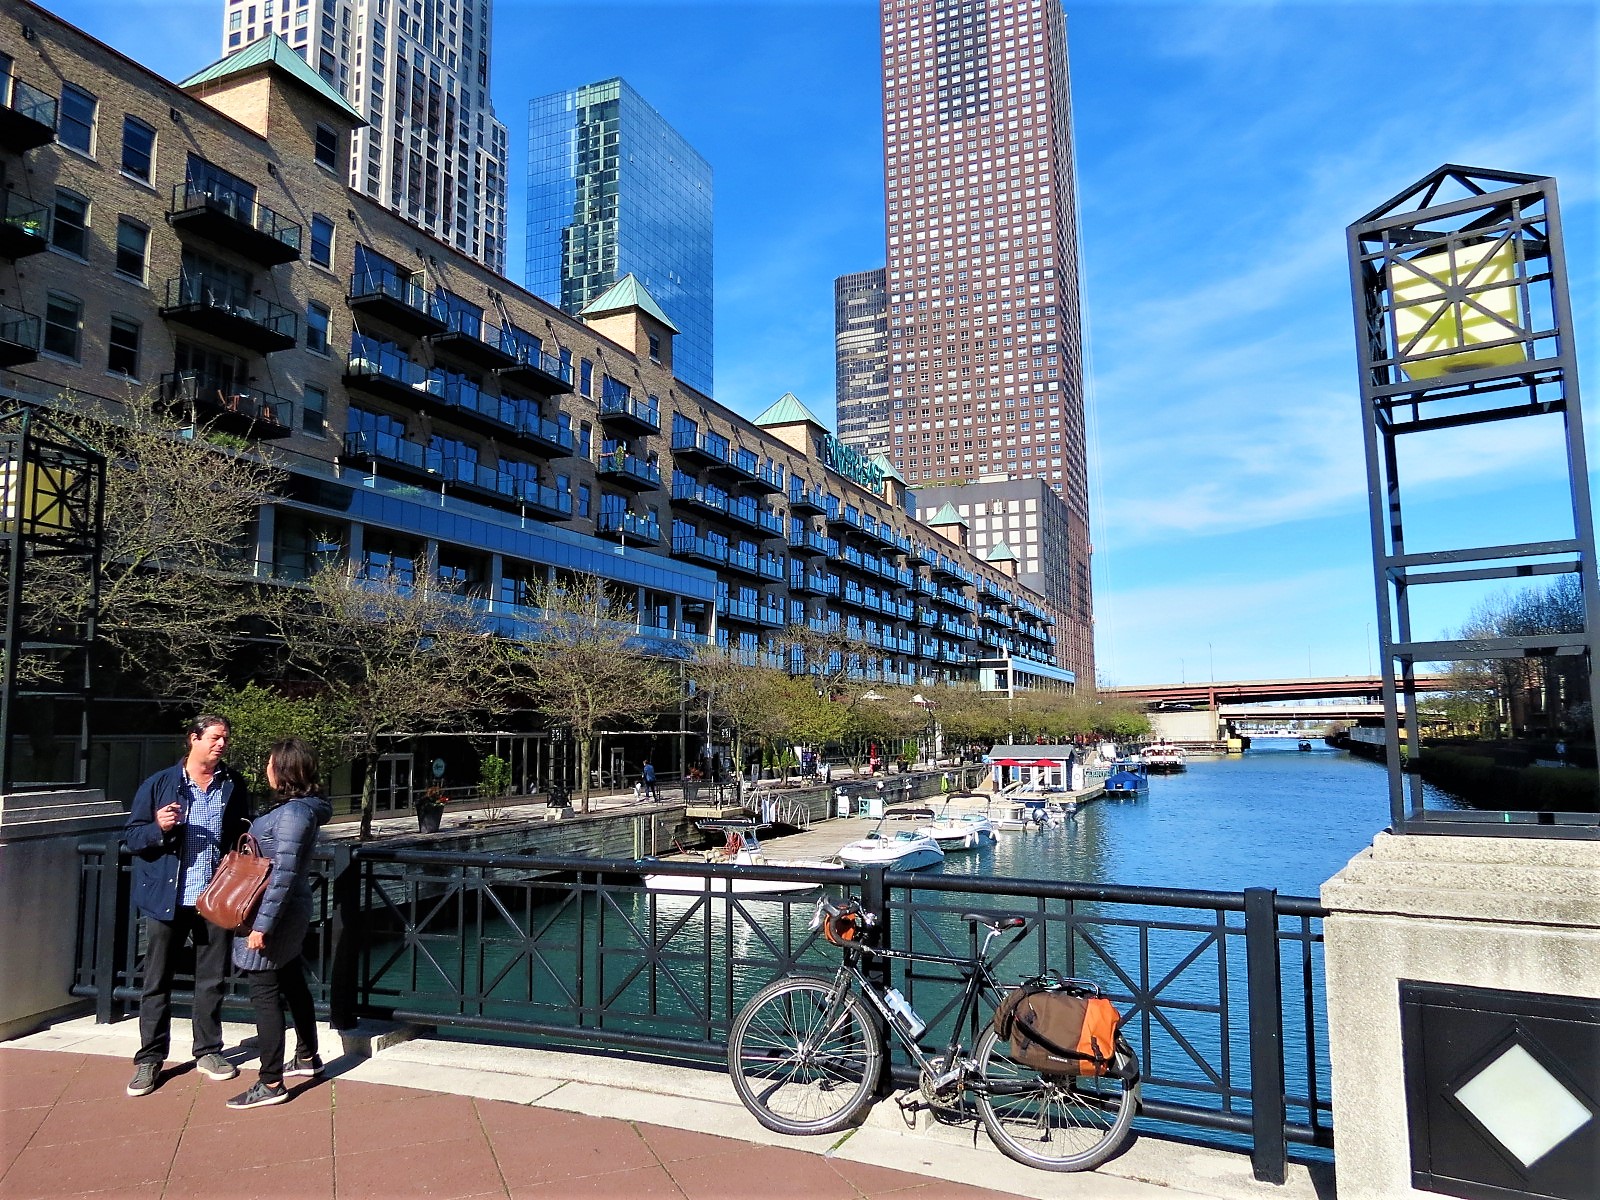 A tour bike and two people talking in front of a water channel, warehouses turned condos, and skyscraper bases.